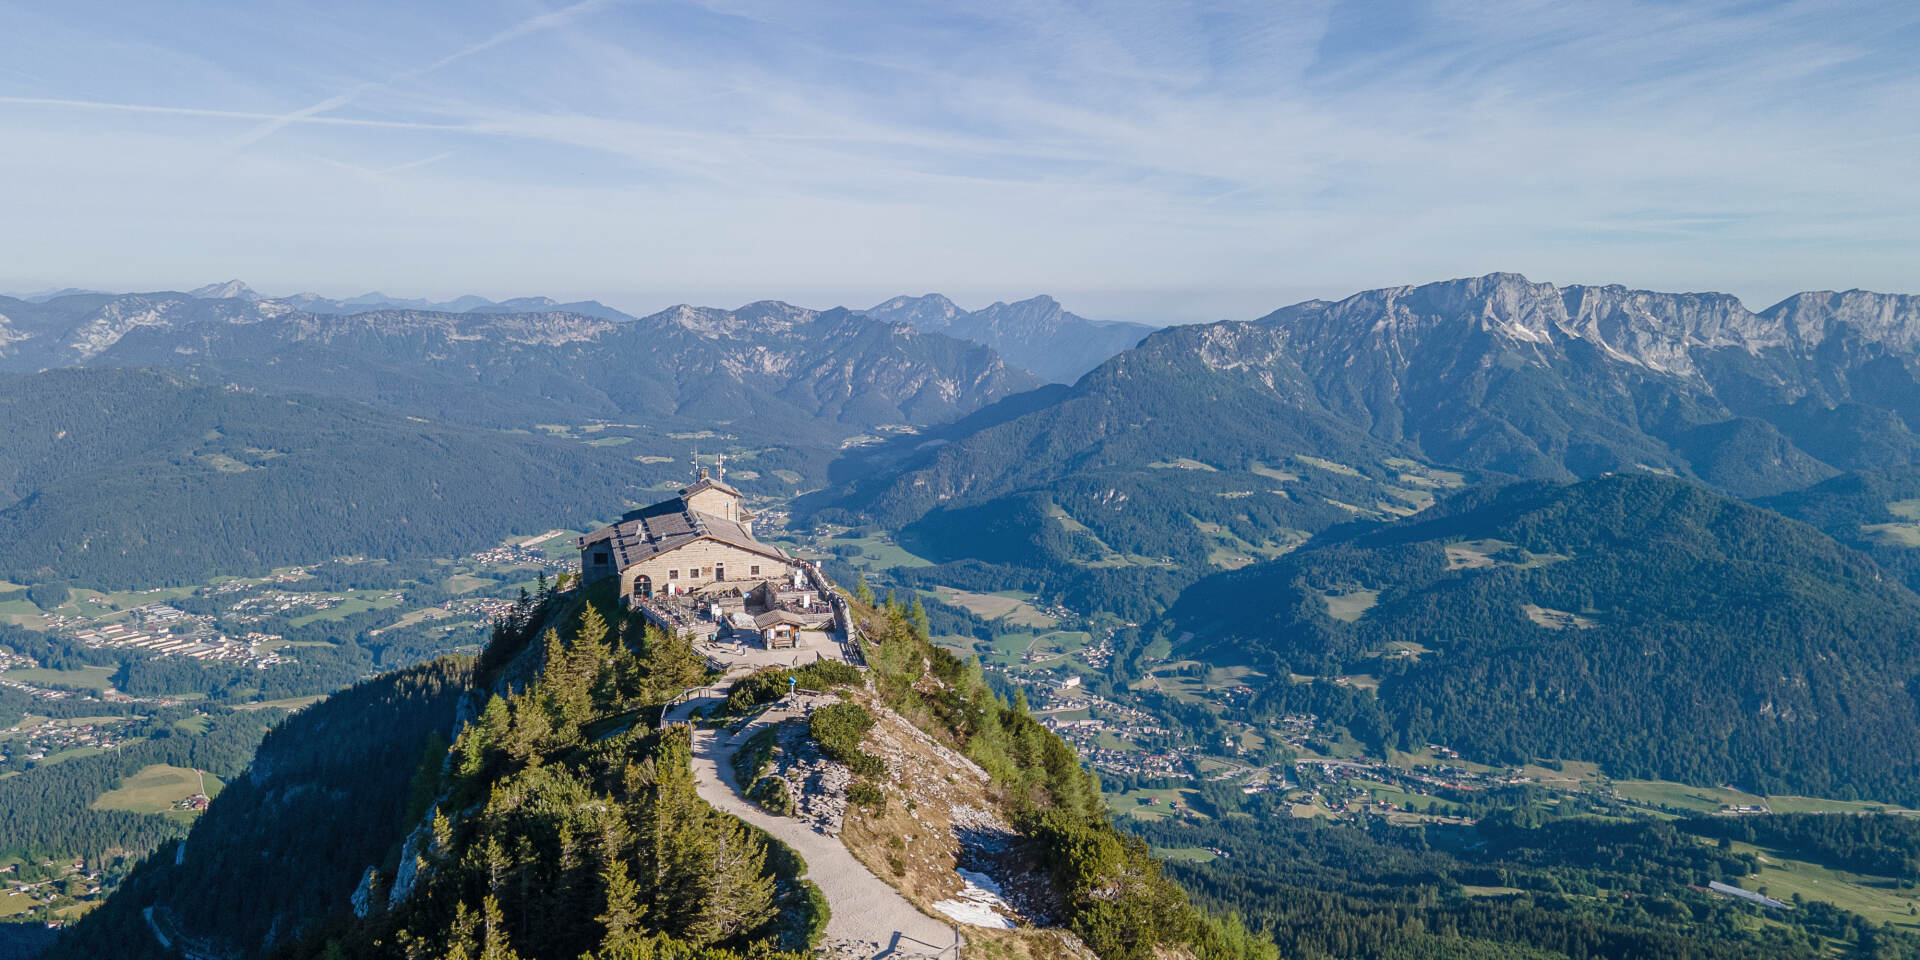  The Eagles Nest with a panoramic view over the mountains of Berchtesgaden